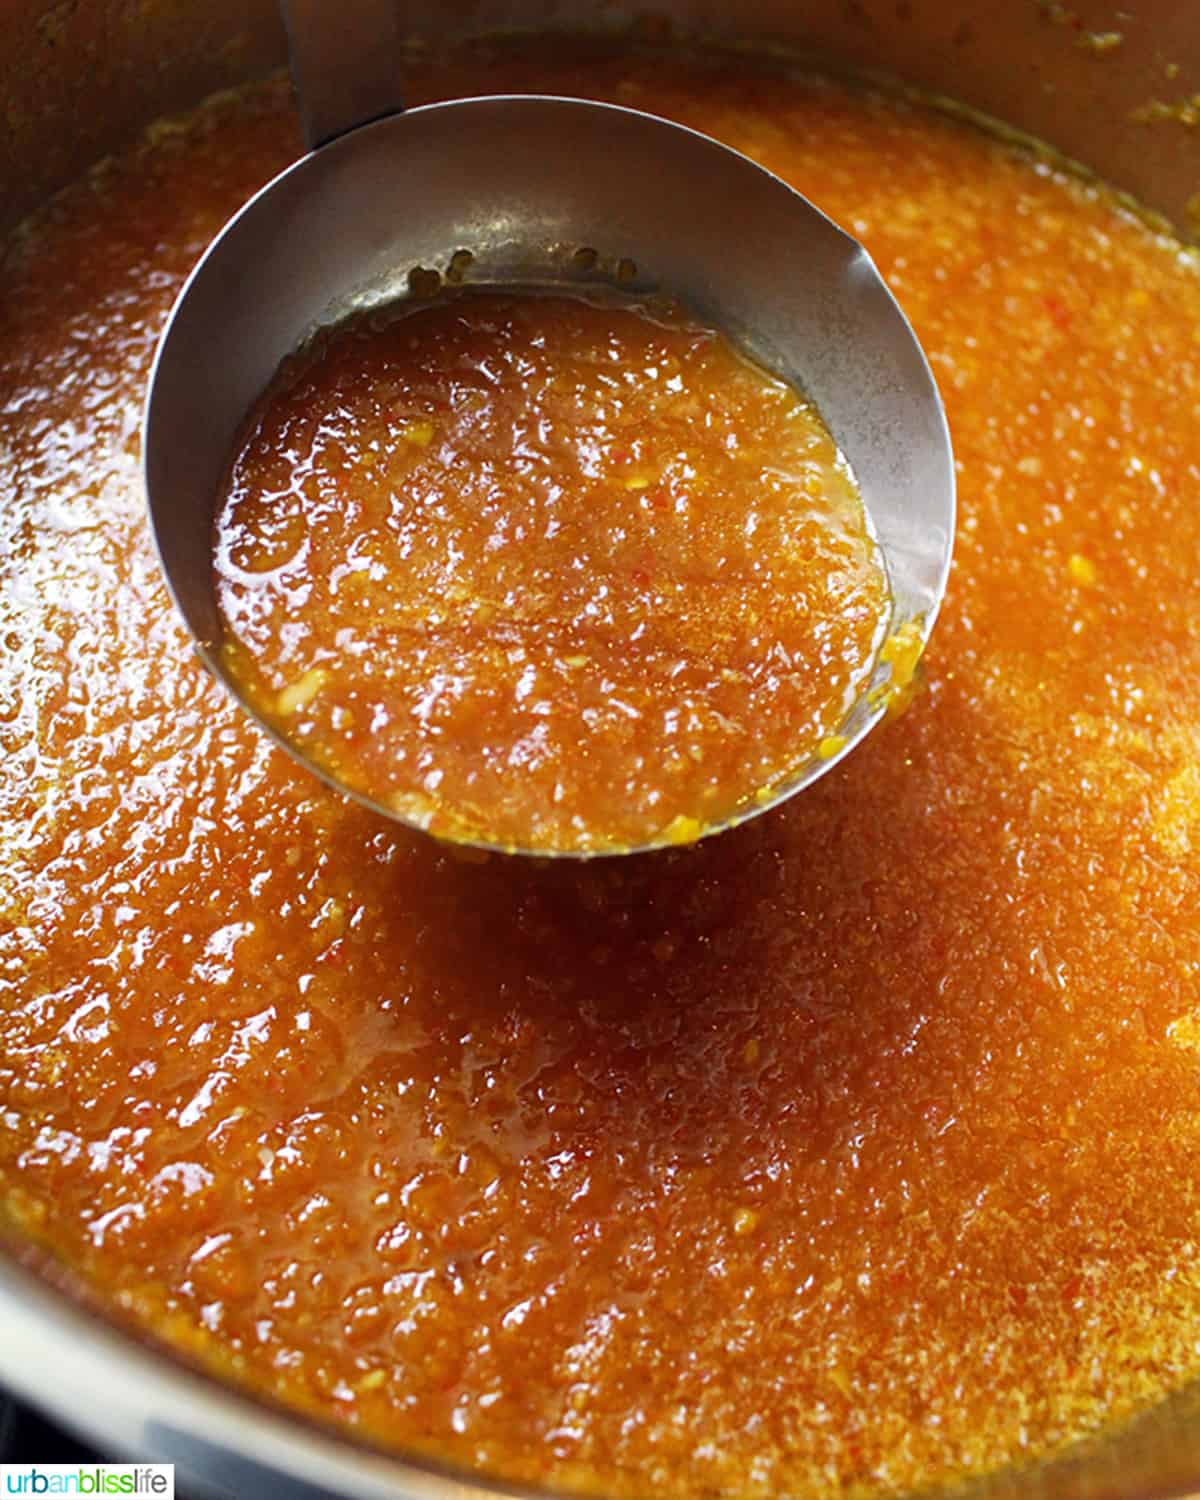 a ladle with sweet chili dipping sauce above a large pot full of the homemade chili sauce.